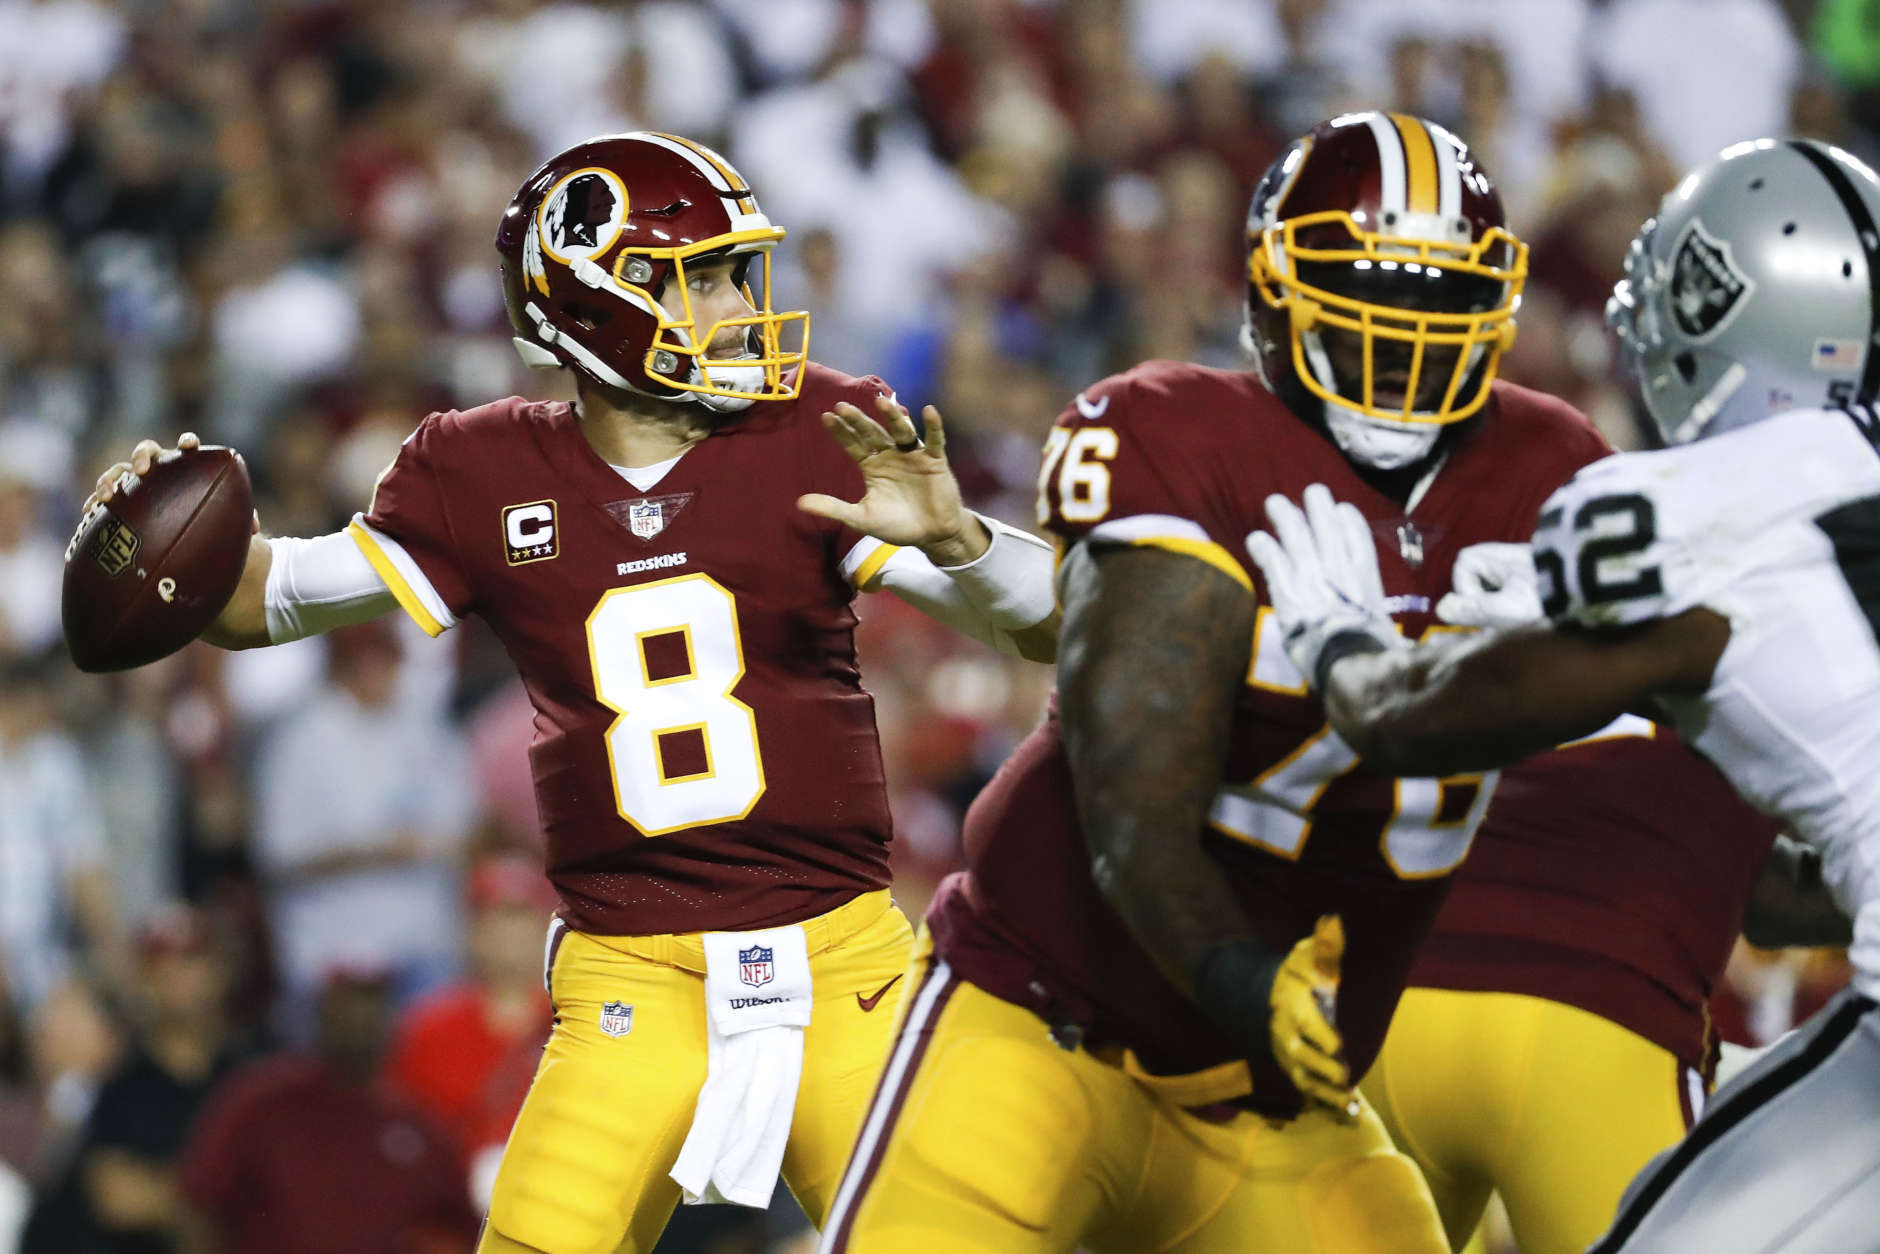 Washington Redskins quarterback Kirk Cousins (8) passes the ball during the first half of an NFL football game against the Oakland Raiders in Landover, Md., Sunday, Sept. 24, 2017. (AP Photo/Alex Brandon)